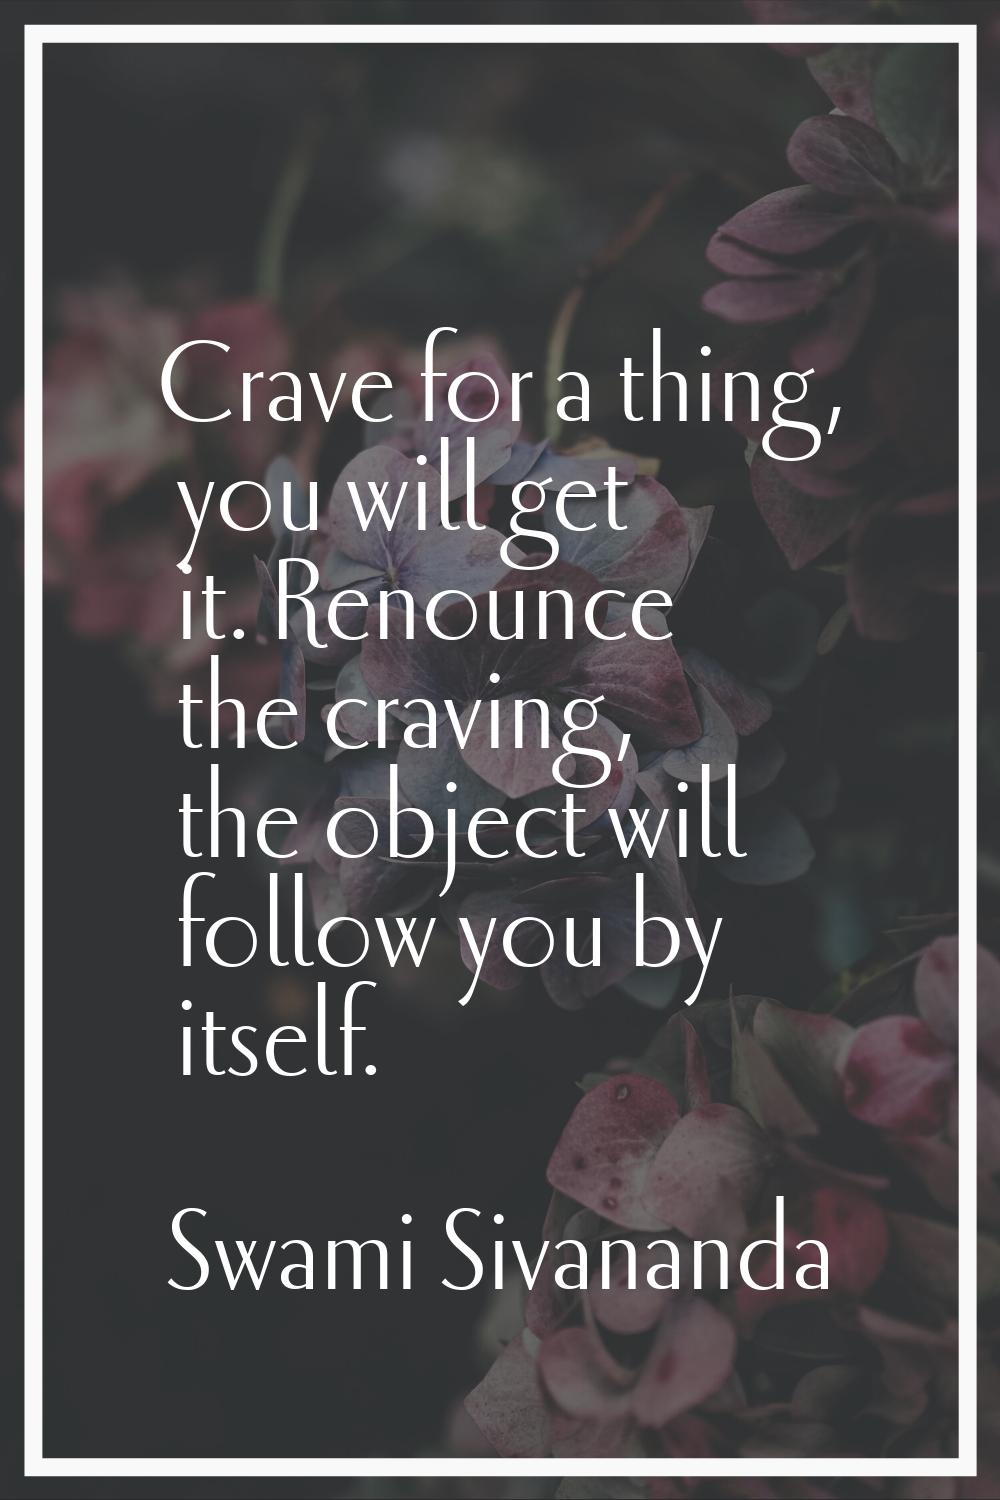 Crave for a thing, you will get it. Renounce the craving, the object will follow you by itself.